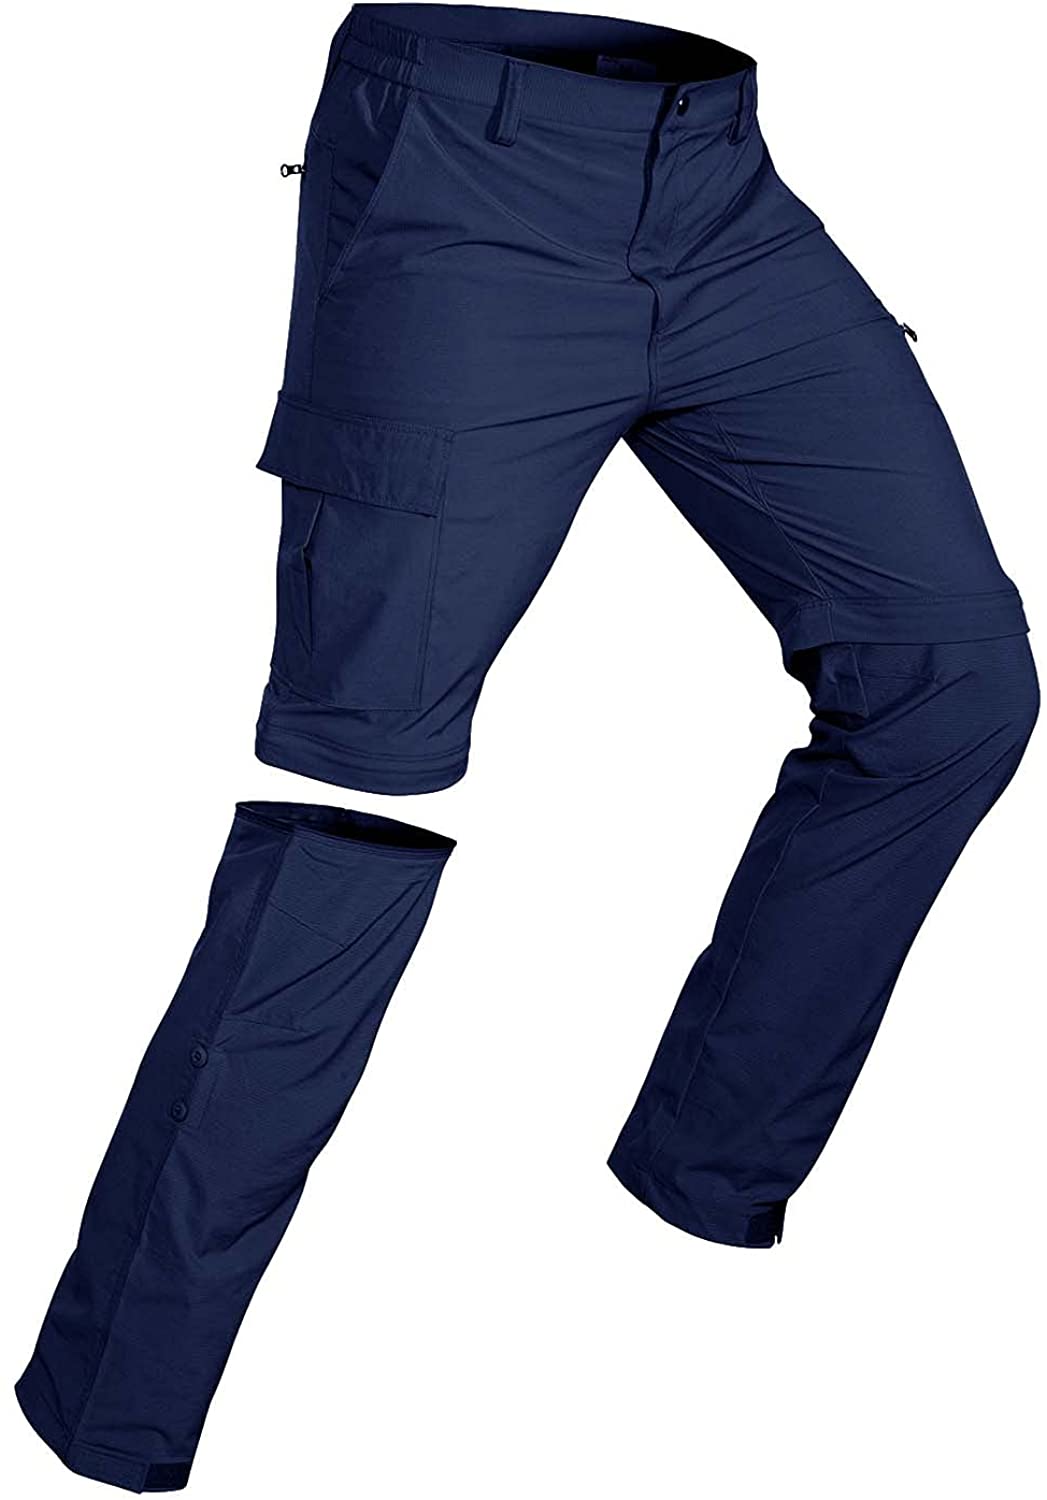 Wespornow Men's-Convertible-Hiking-Pants Quick Dry Lightweight Zip Off Breathable Cargo Pants for Outdoor, Fishing, Safari Navy / 3X-Large